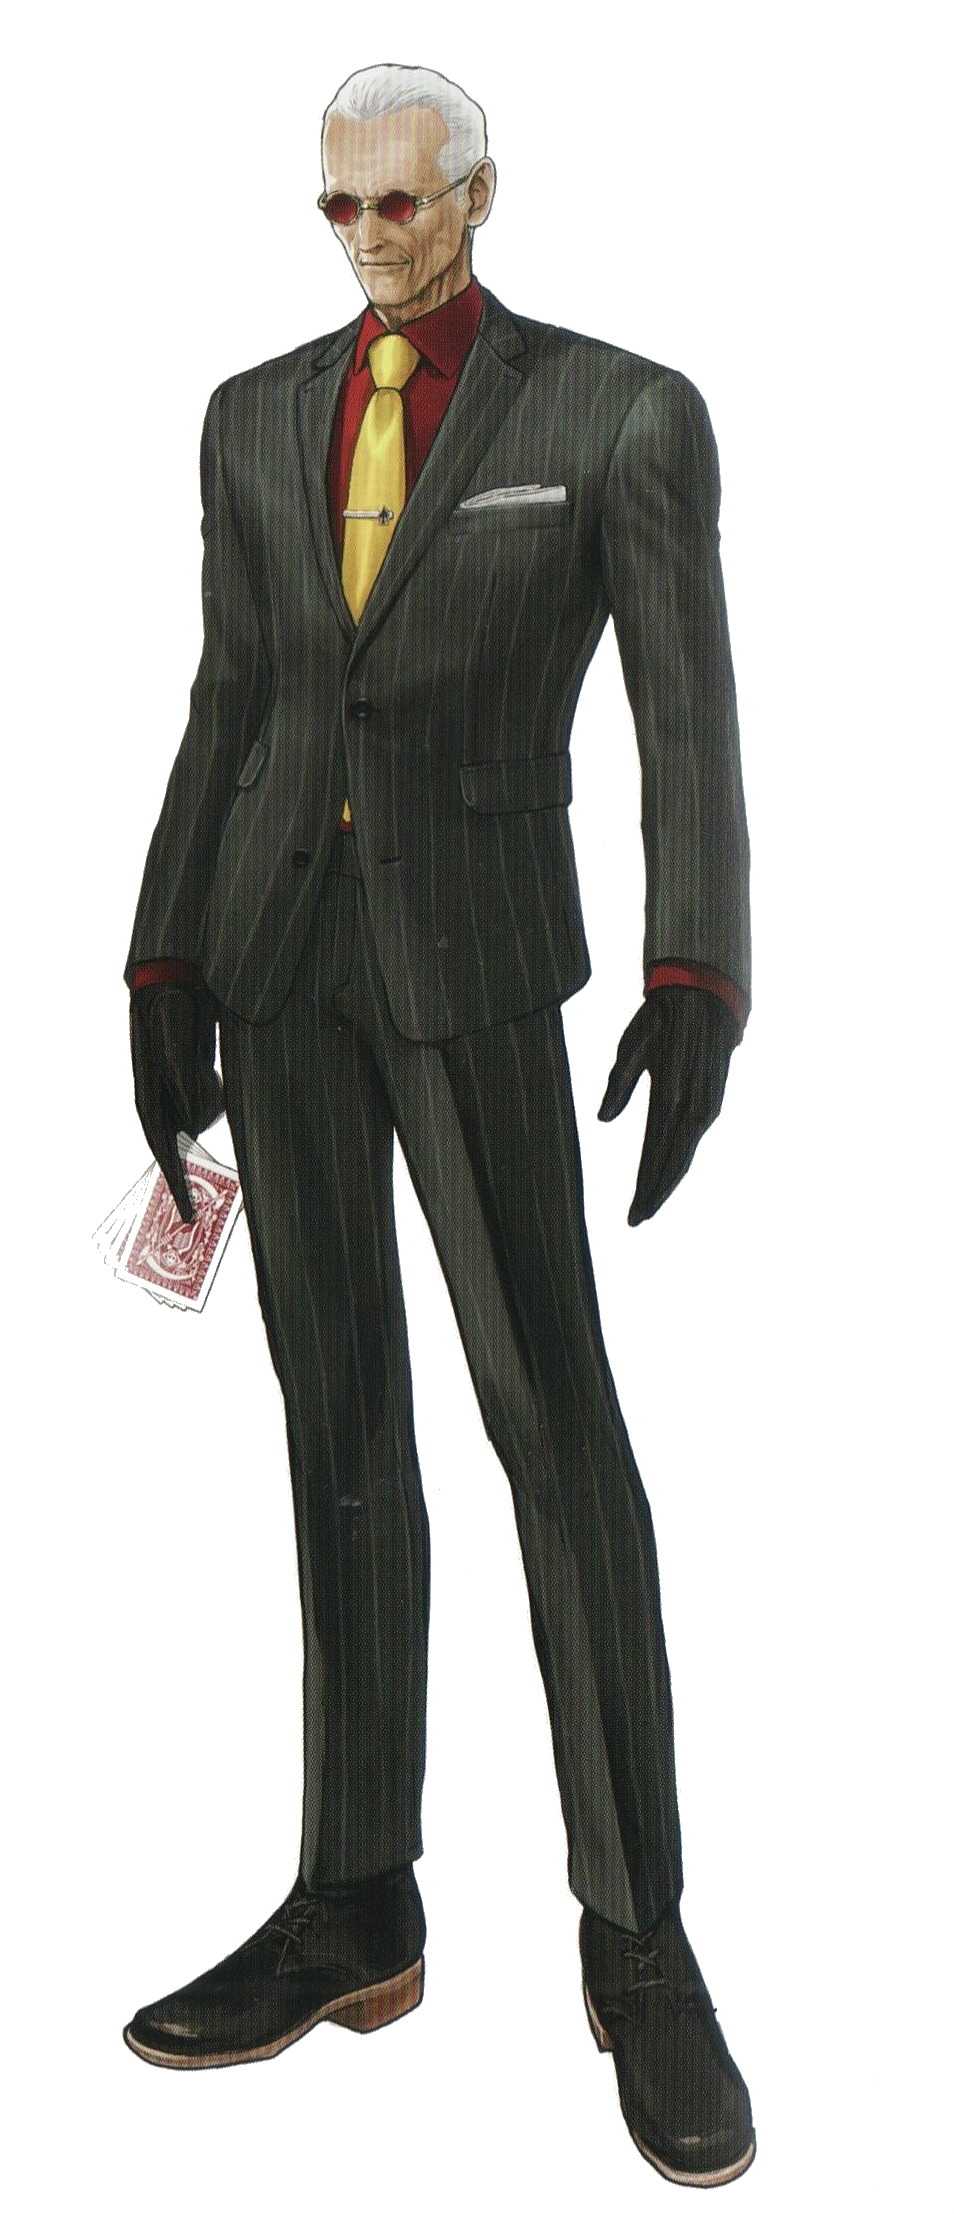 Oswald (オズワルド) is a character from The King of Fighters series. 